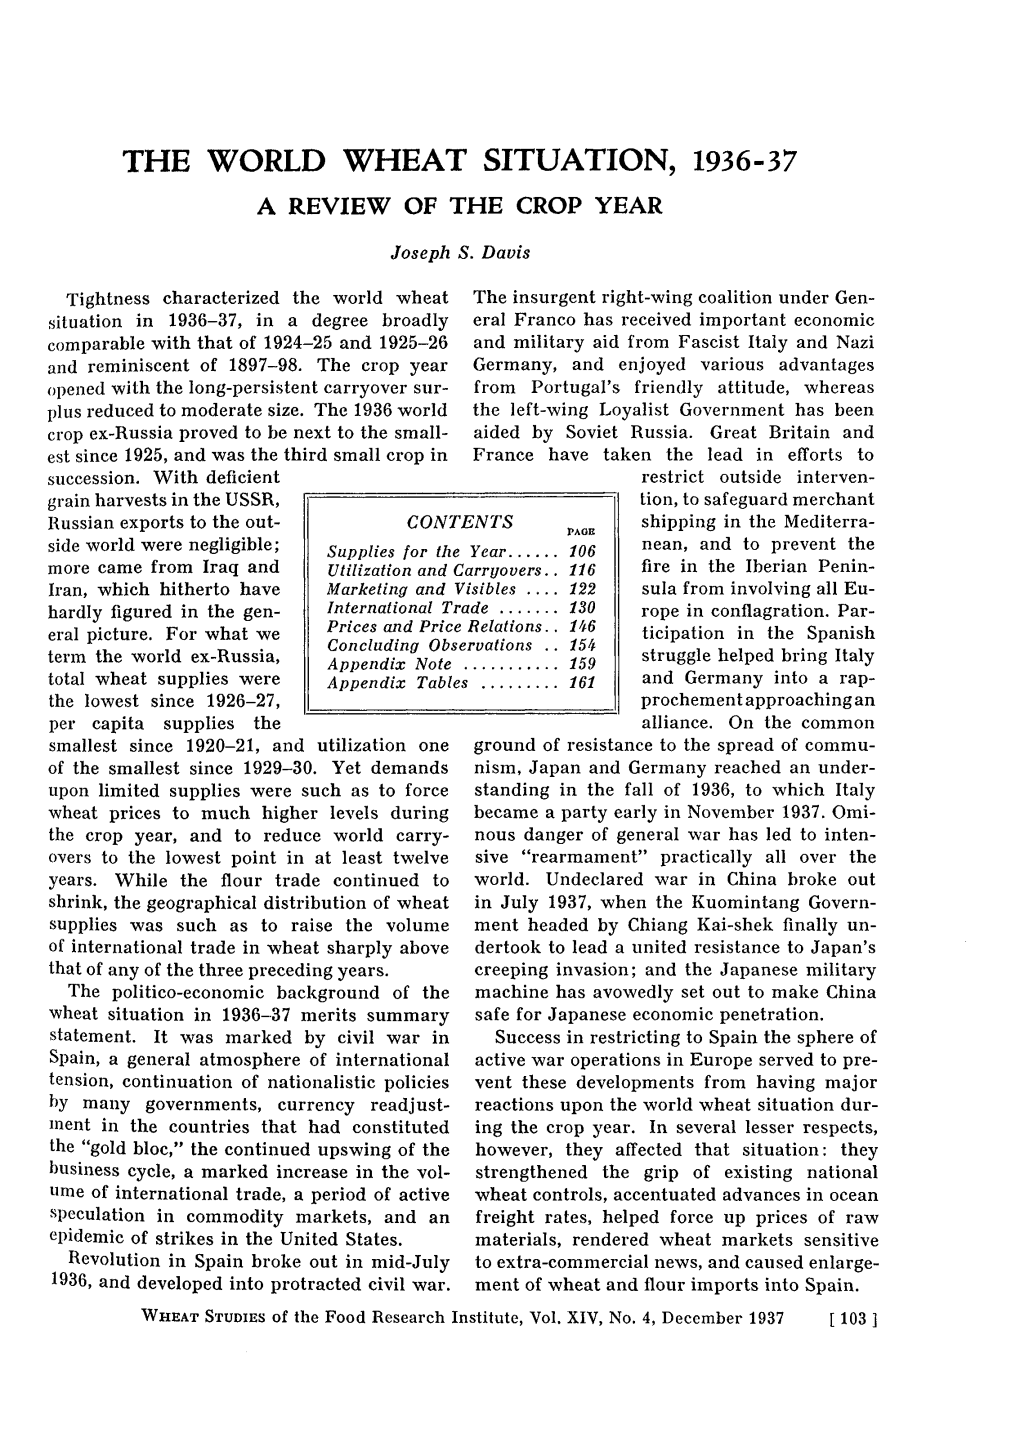 The World Wheat Situation, 1936-37 a Review of the Crop Year